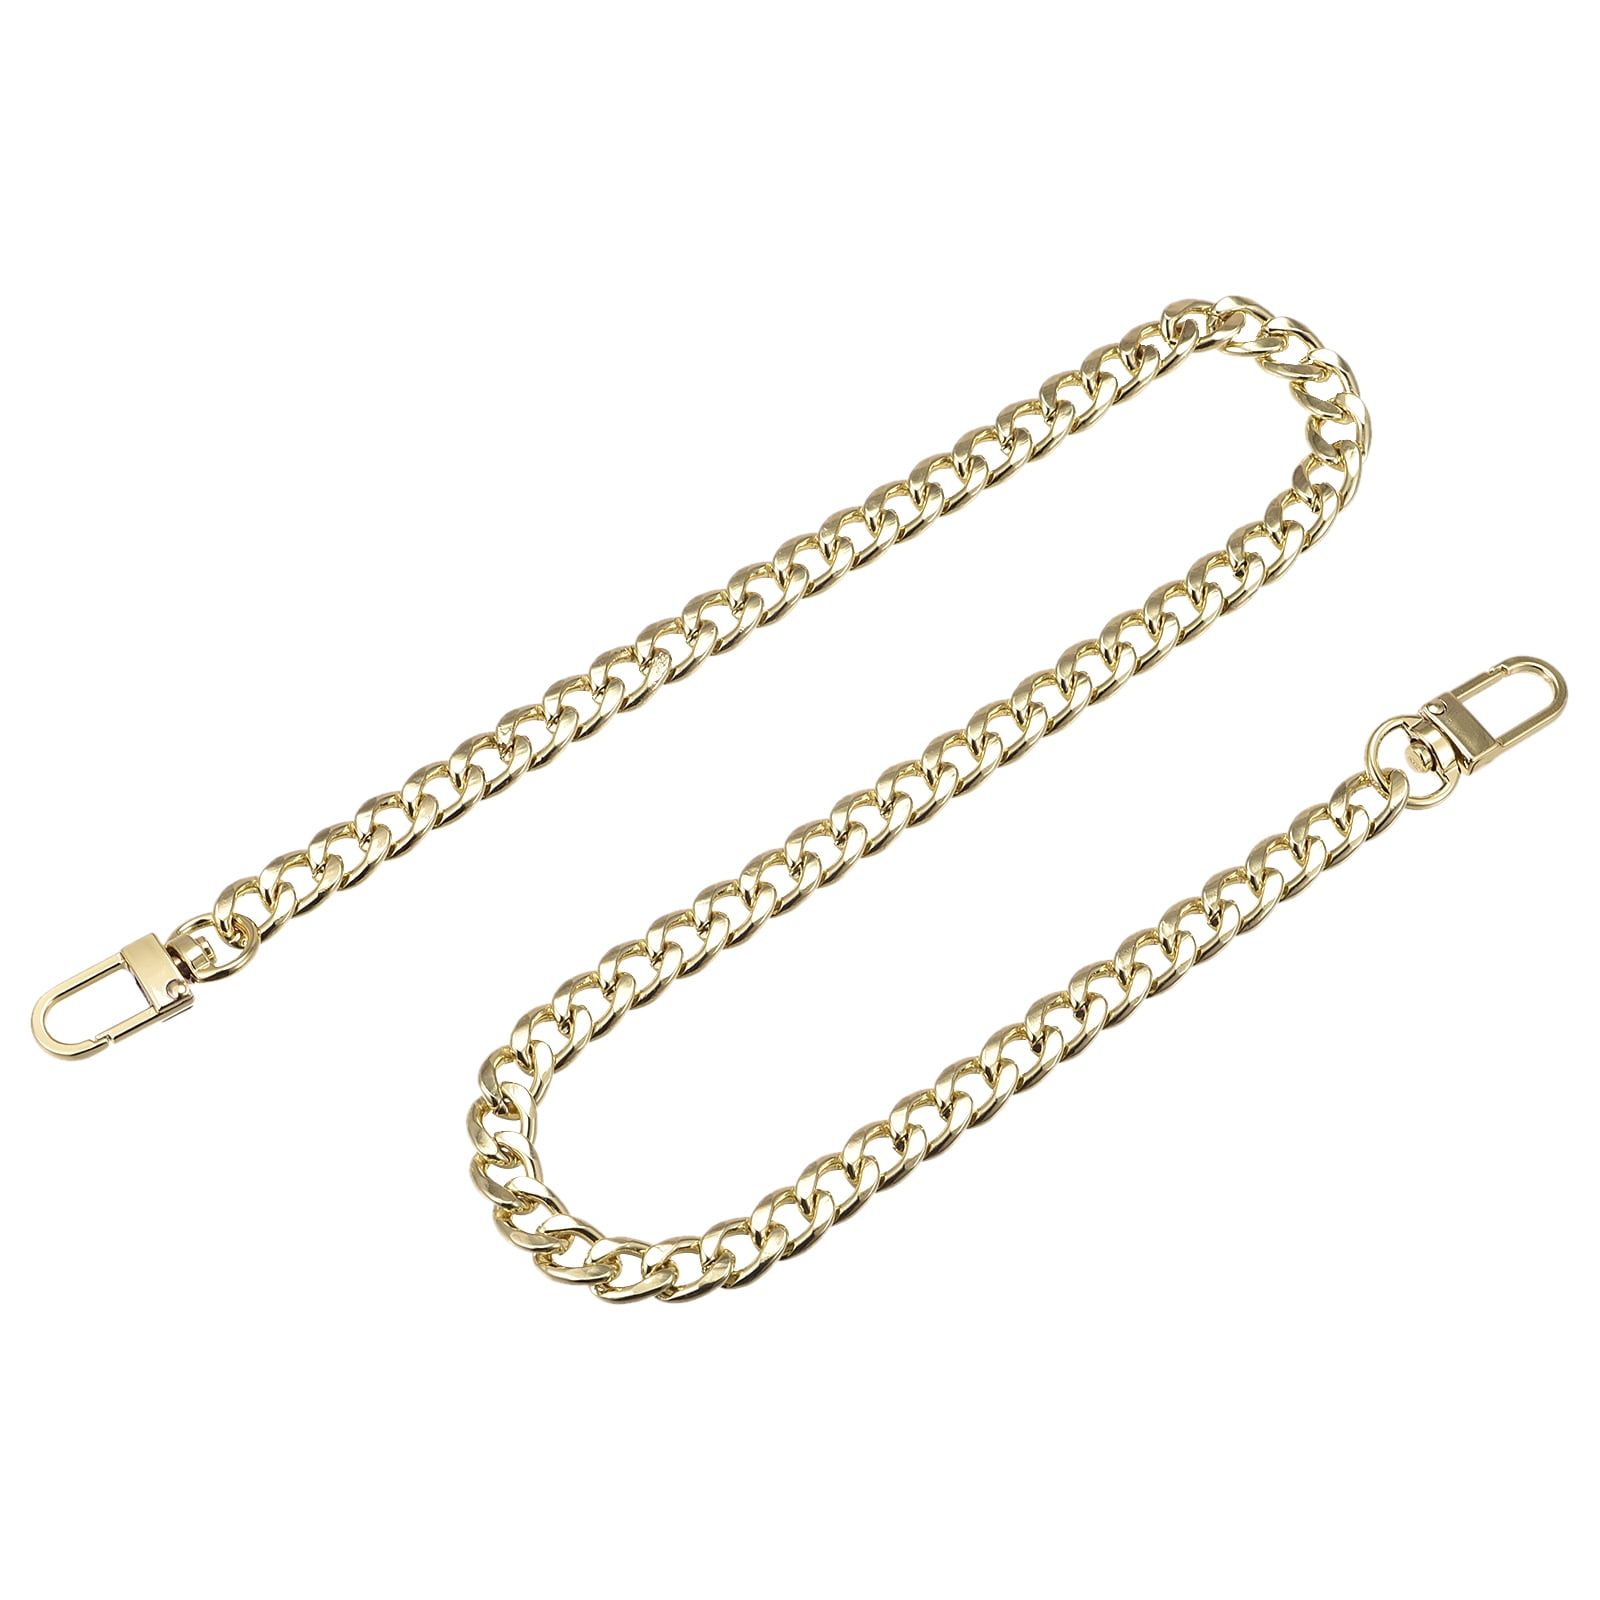  Wokape 4 Sizes Gold Purse Chain Strap, Replacement Flat Chain  Strap with Buckles, Perfect for DIY Metal Shoulder Purse Chain Replacement  - 7.5 15.7 39.4 47.2